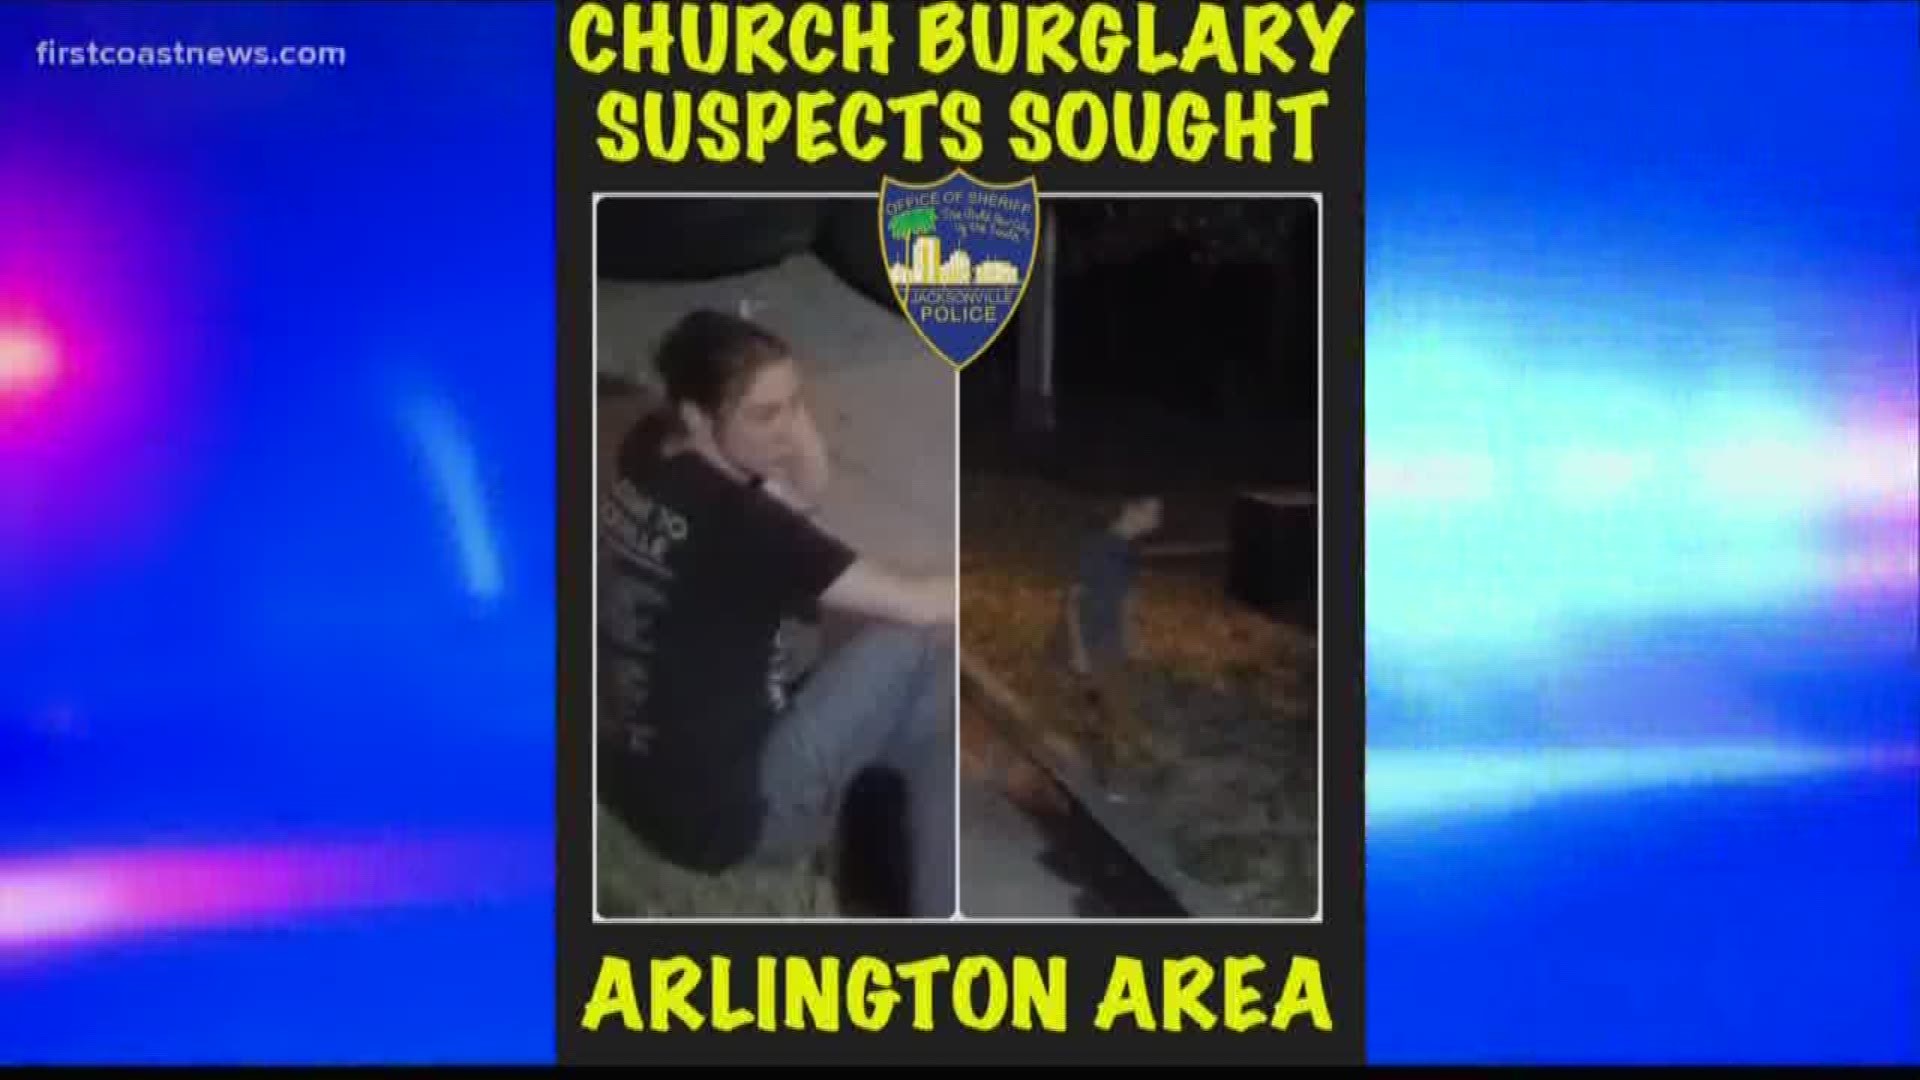 Police are searching for two suspects who they say broke in and stole from a church in Arlington.